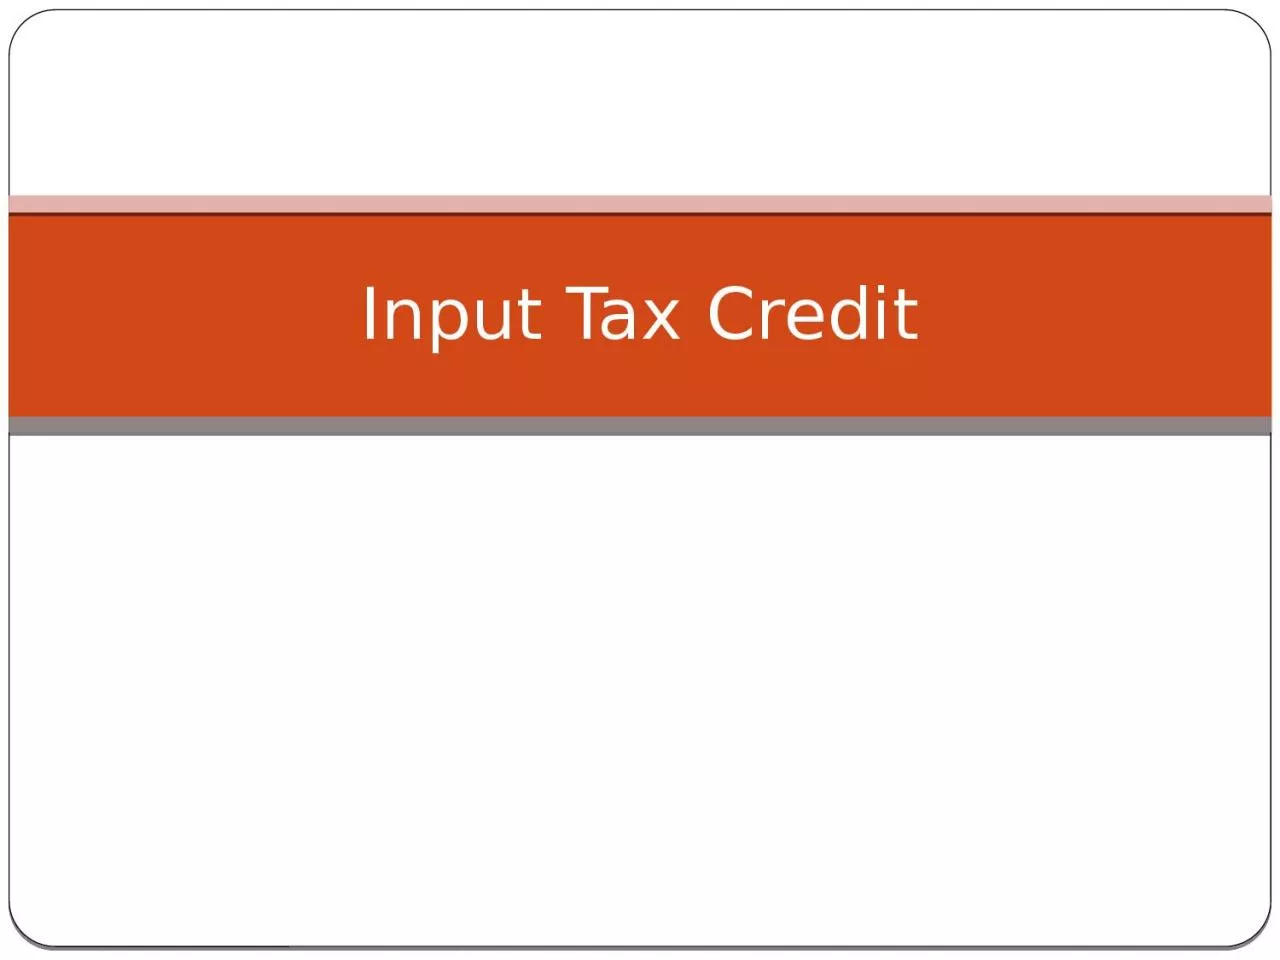 Input Tax Credit This presentation covers only those Input tax credit topics which are